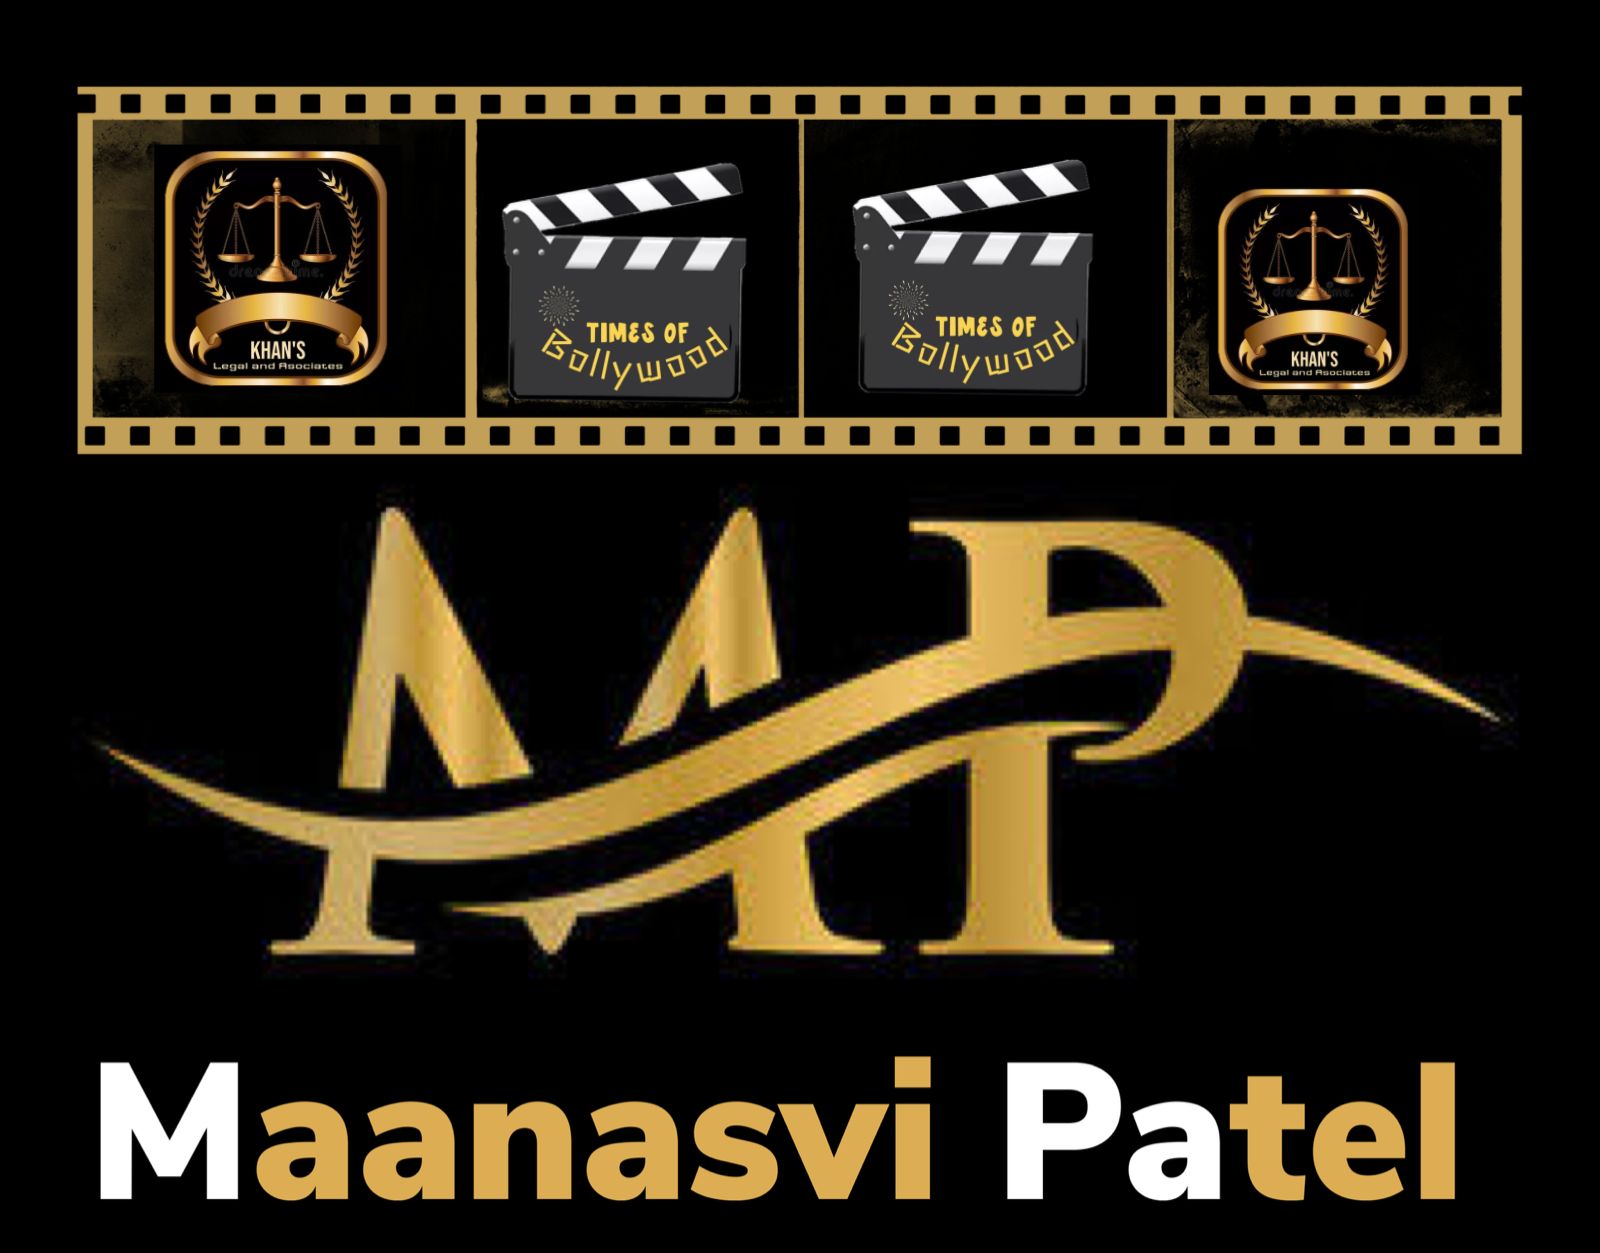 Maanasvi Patel the sensational actress with phenomenal experience at a tender age of 22